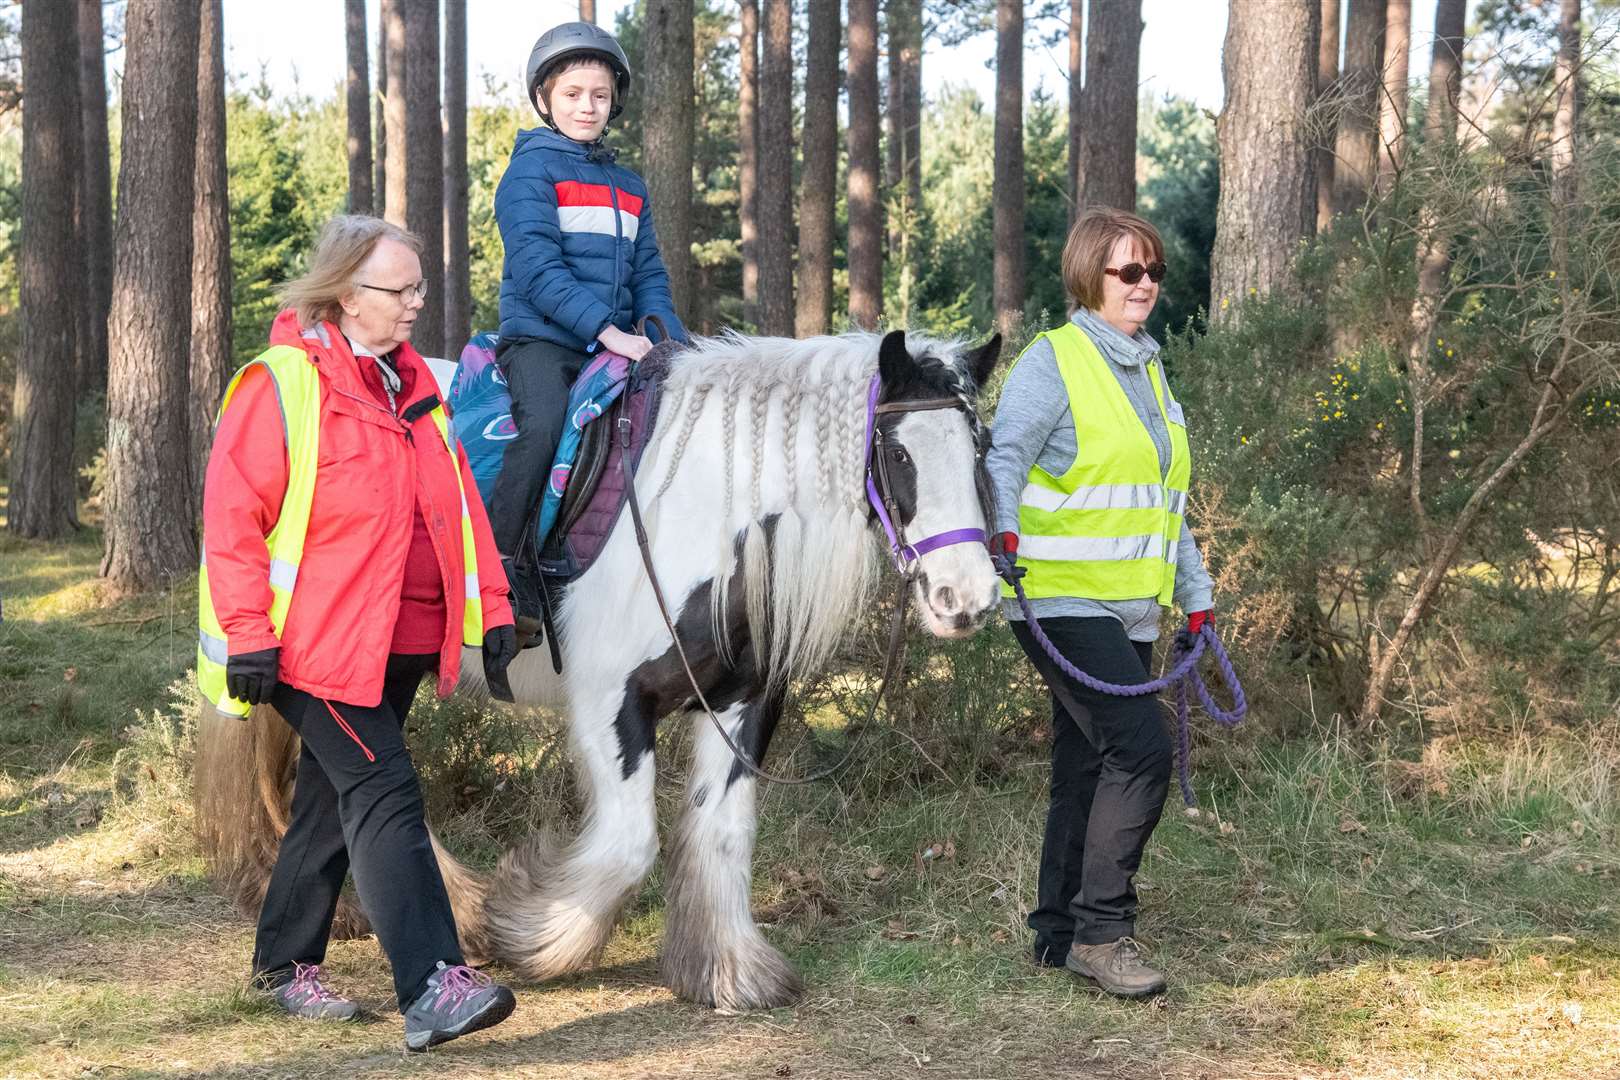 The local branch of the Riding for the Disabled Association provides a range of opportunities to young and old. Picture: Daniel Forsyth